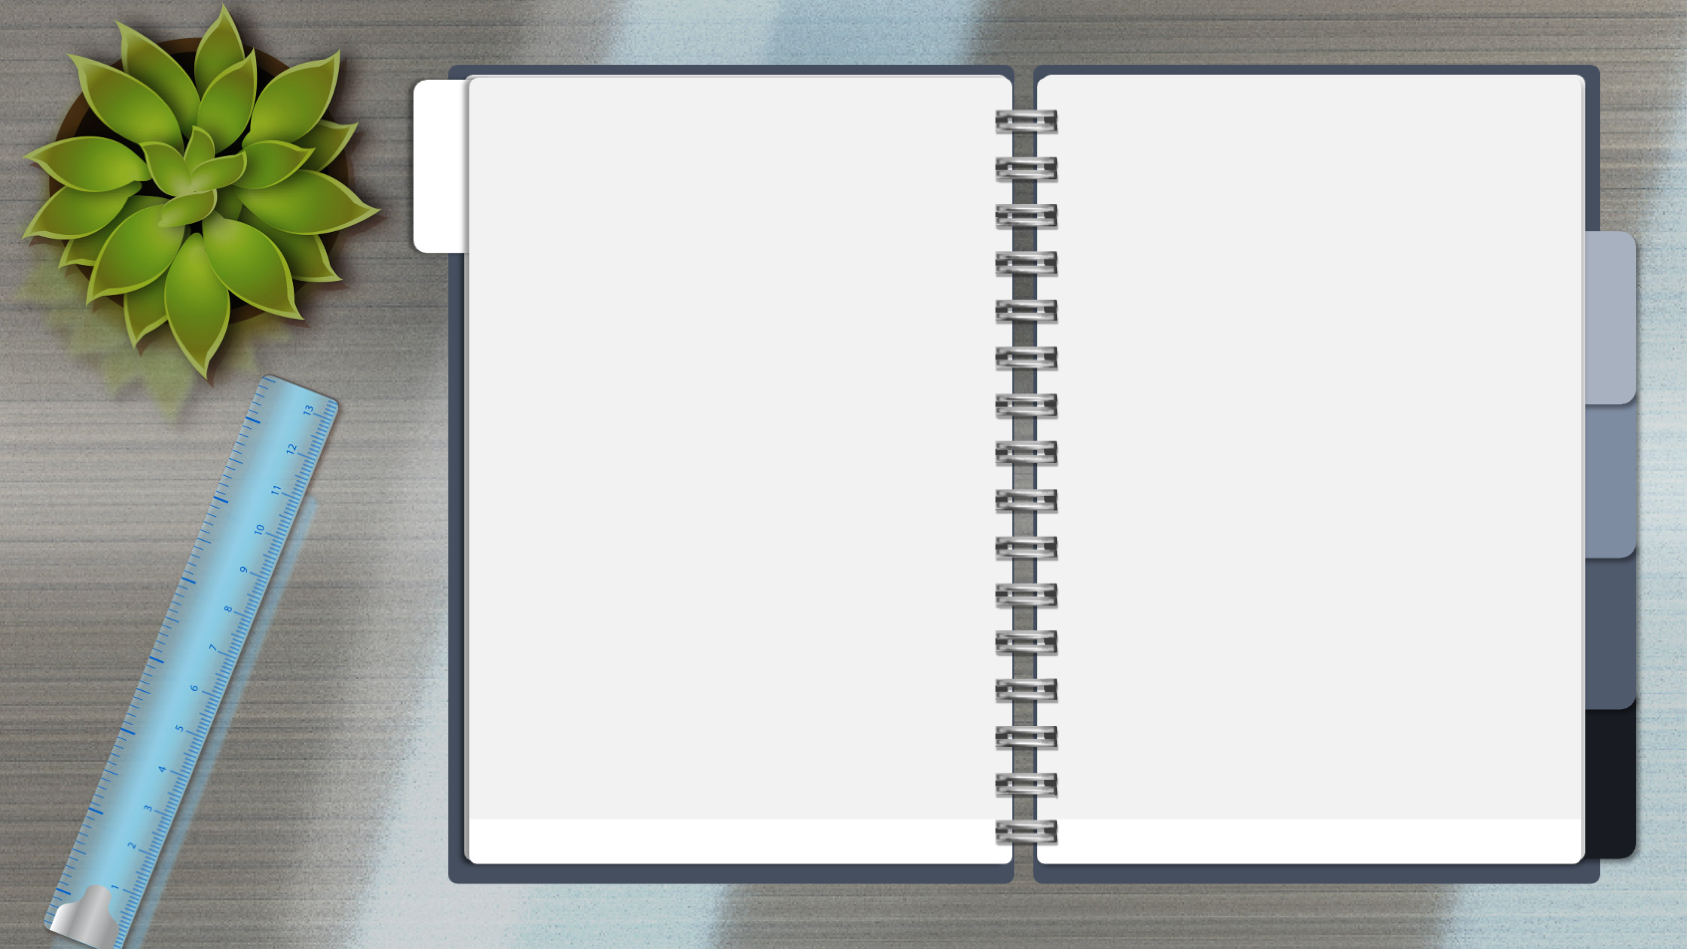 Digital Notebook Templates for Use With Google Slides™ Personal and